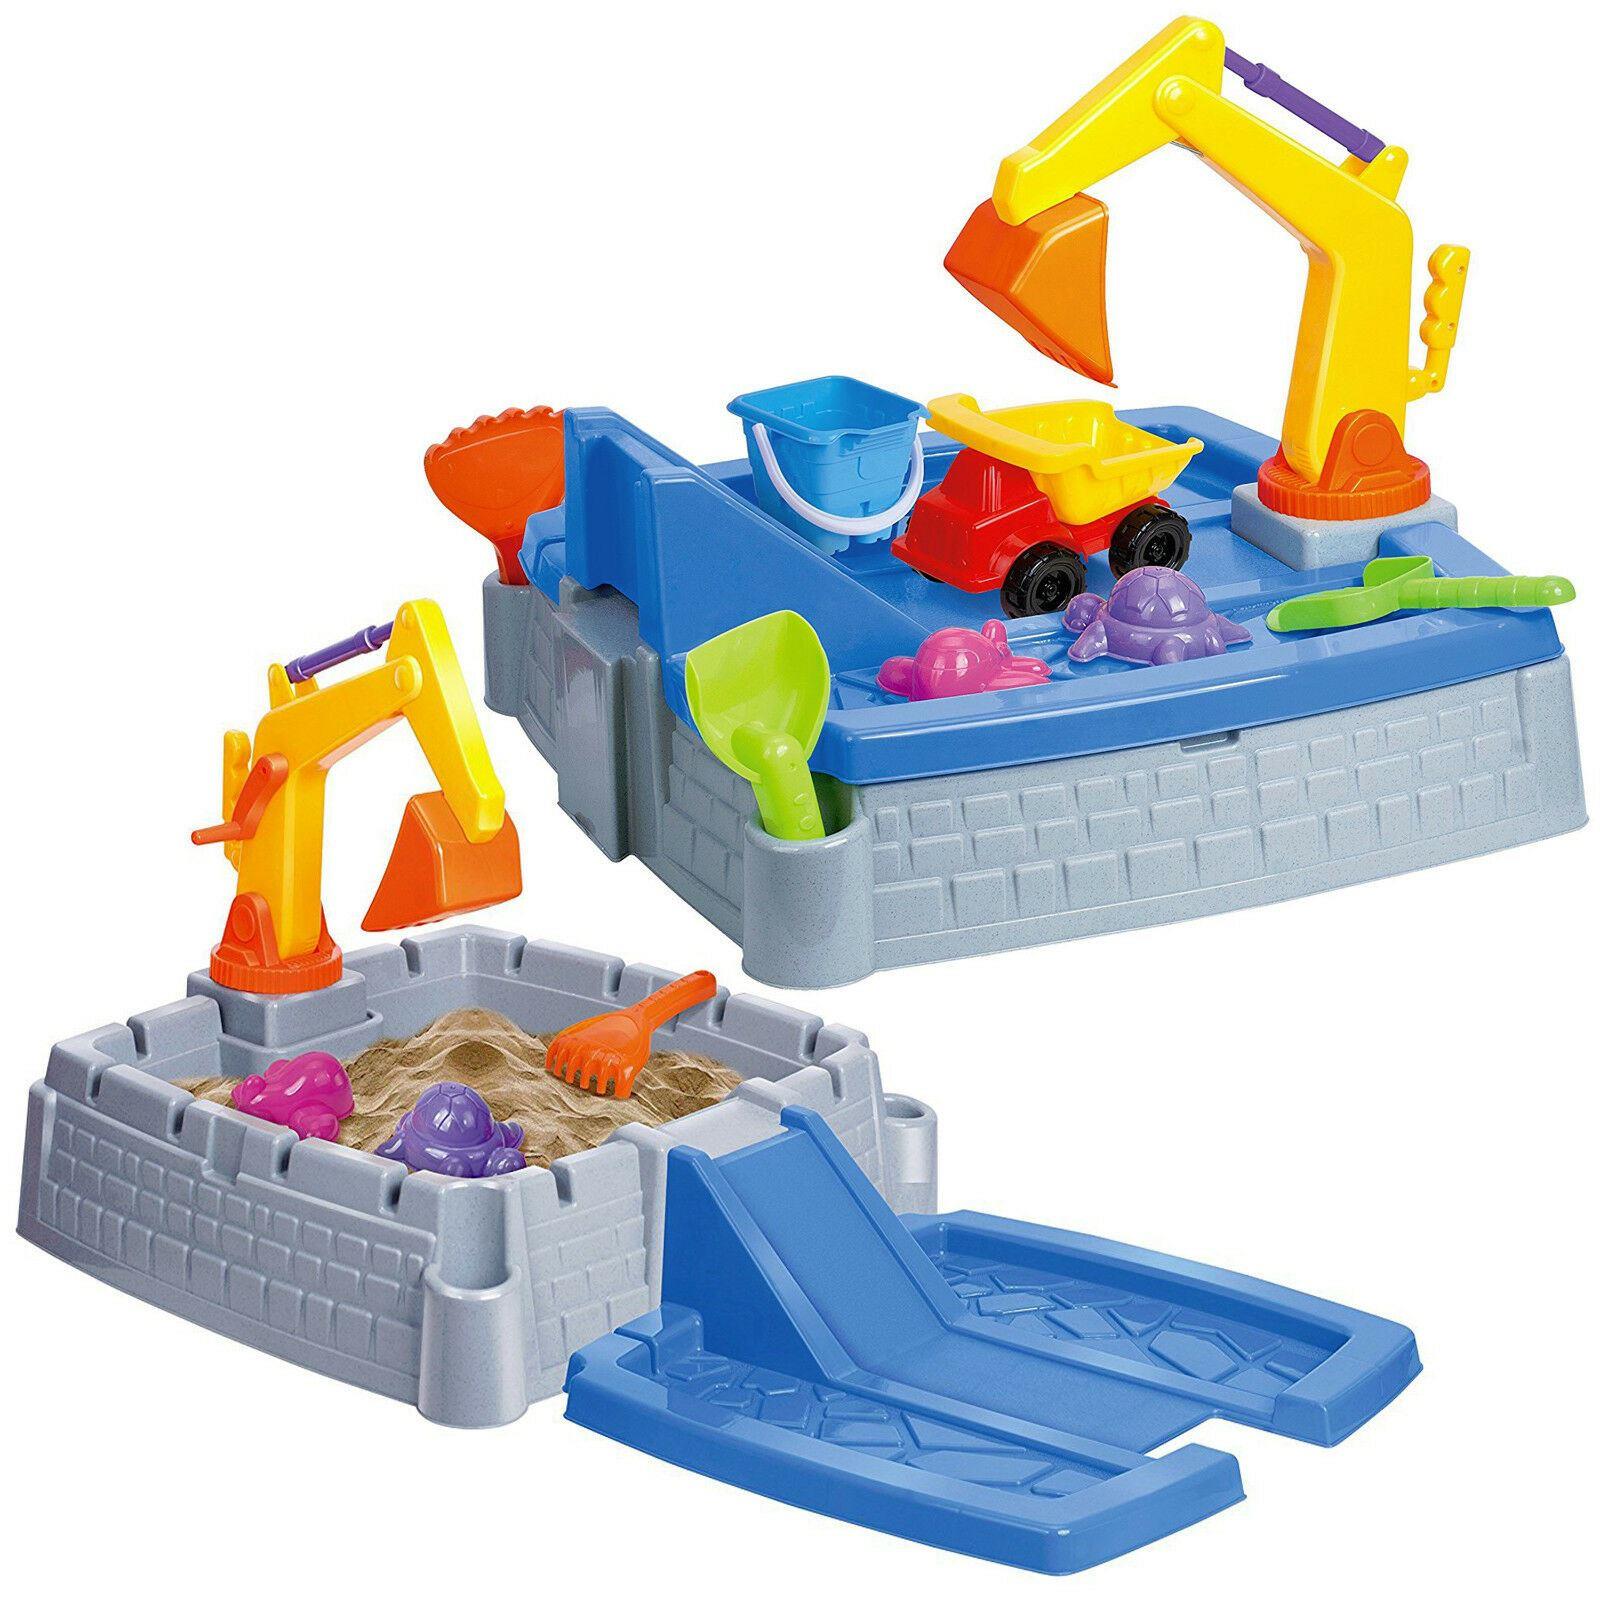 2 in 1 Kids Sand Box Water Table